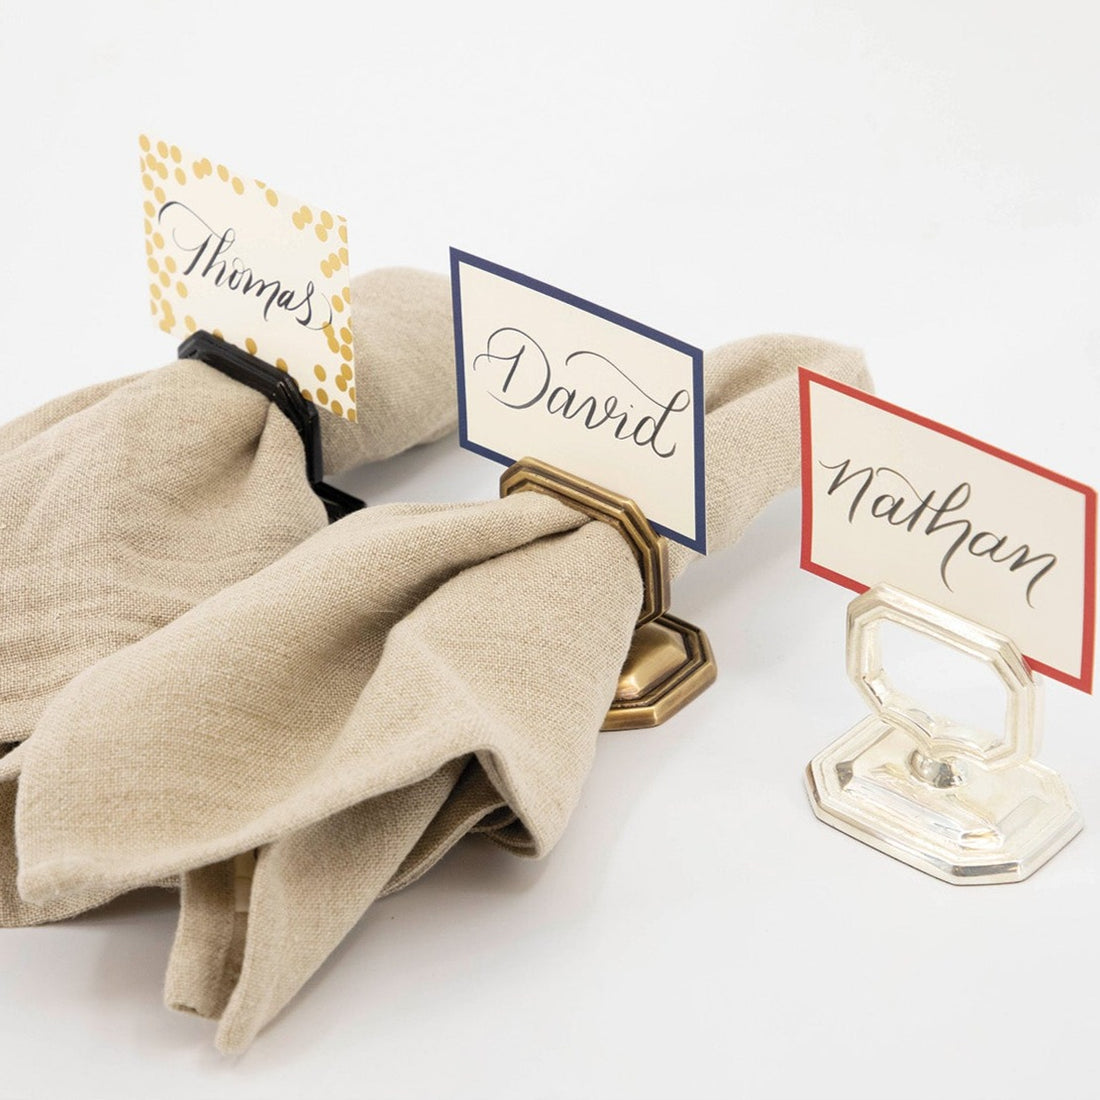 Three vintage-style Napkin Rings with Place Card Holders (Black, Brass and Silver) in a row, all three with different place cards and two holding folded cloth napkins.